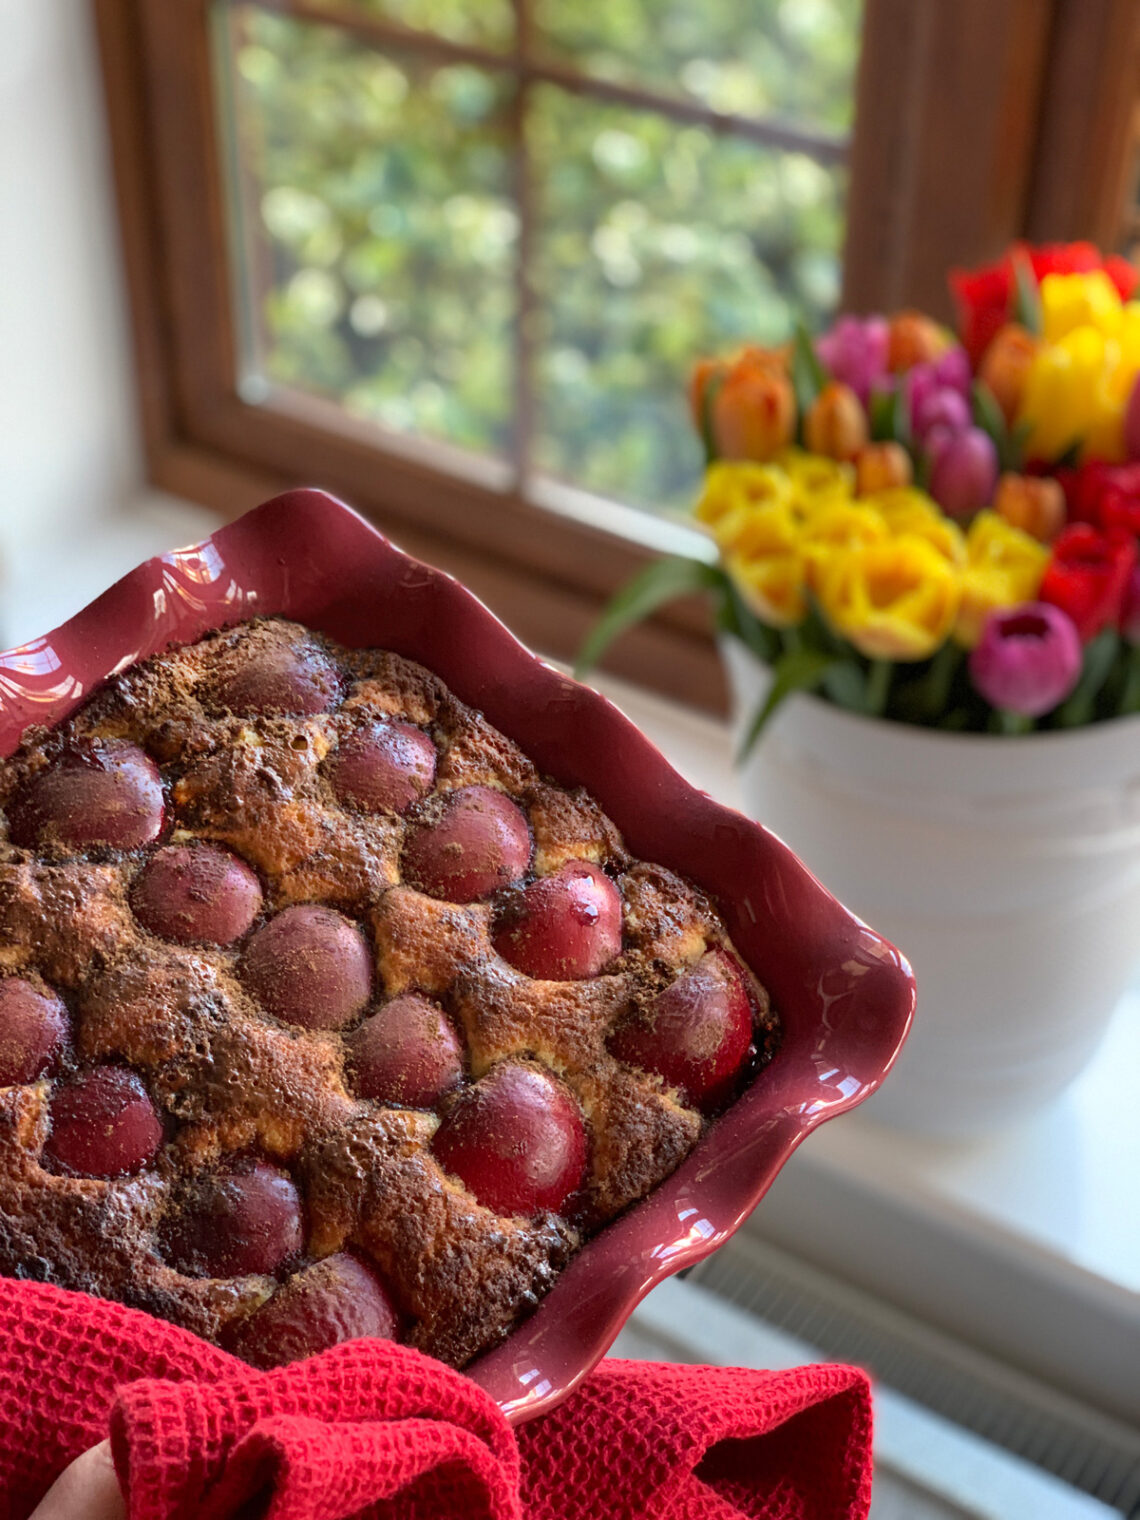 Odessa sweet cake with sour plums. Best food photos and recipes in Maria Kalenska blog